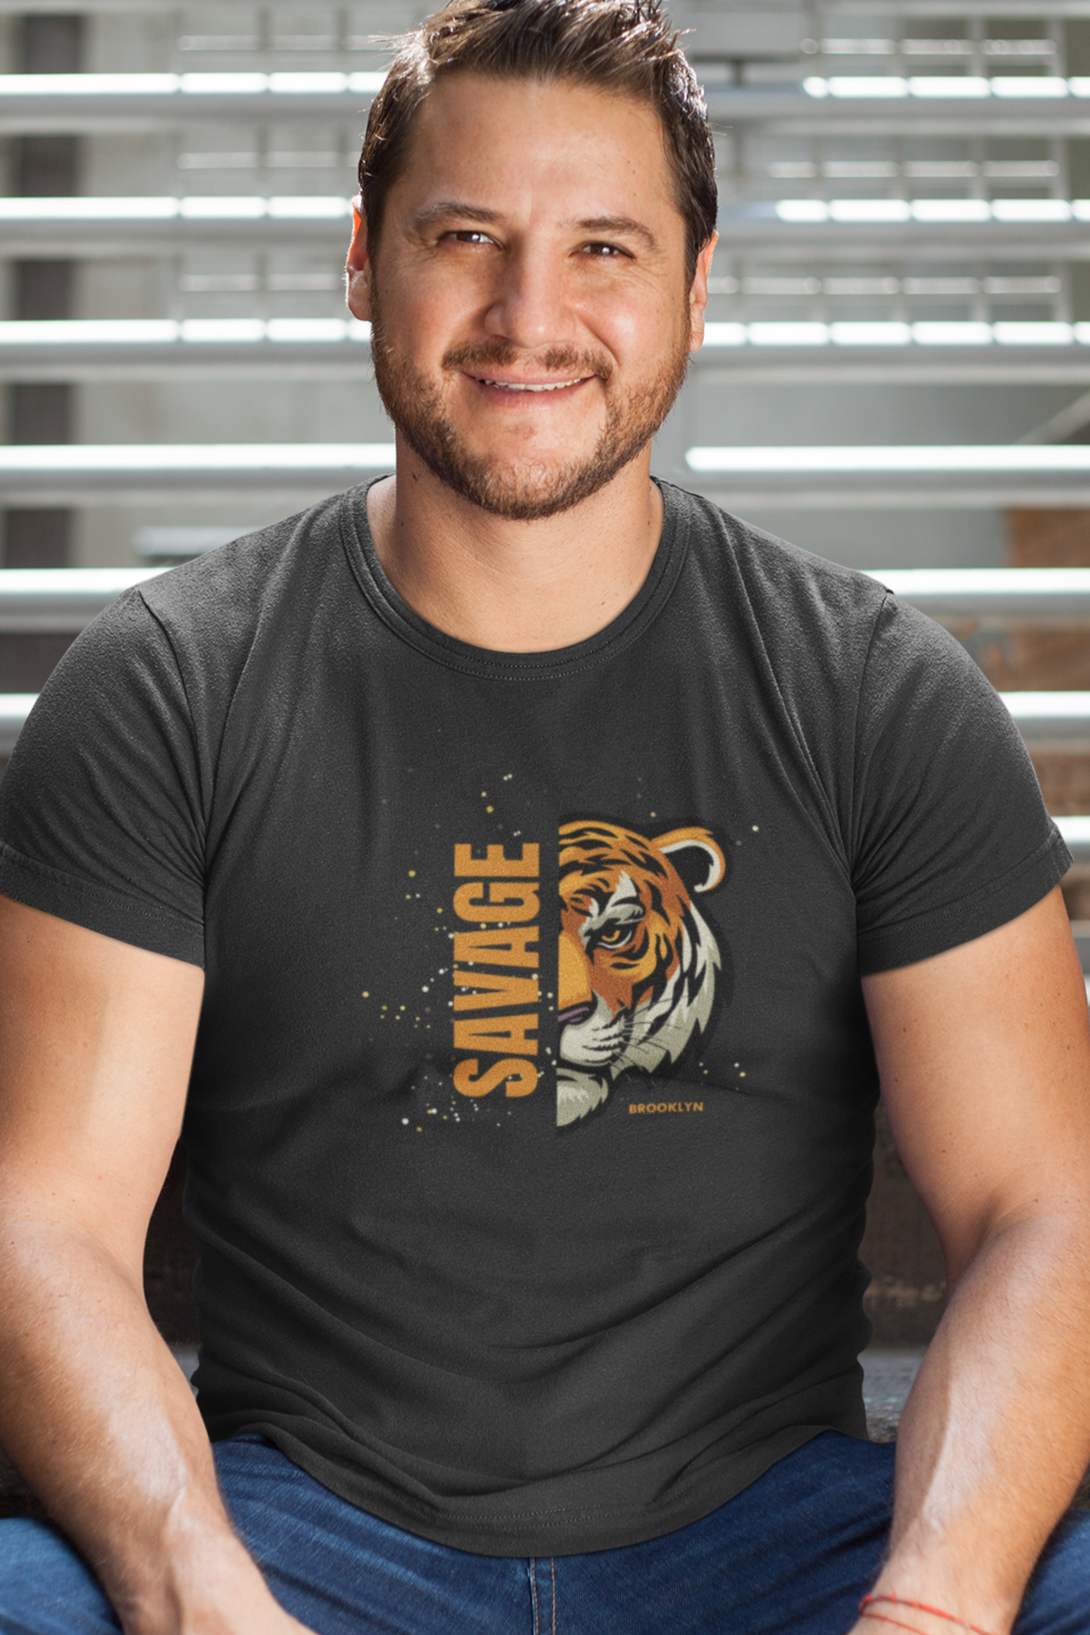 Save The Tiger Printed T-Shirt For Men - WowWaves - 6